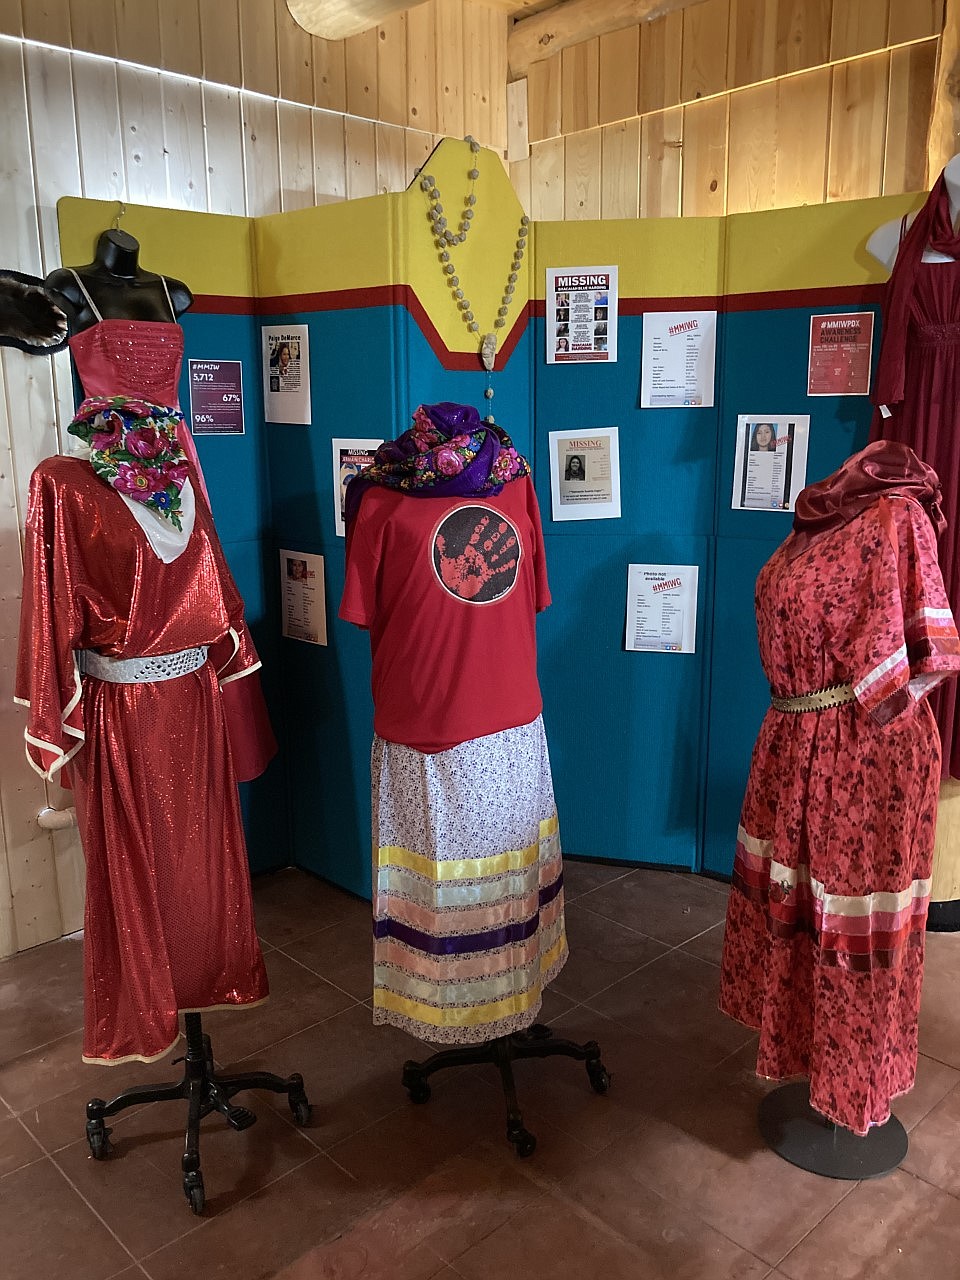 Red dresses on loan to the museum, bringing attention to the Murdered and Missing Indigenous People movement, are part of a new display. (Carolyn Hidy/Lake County Leader)